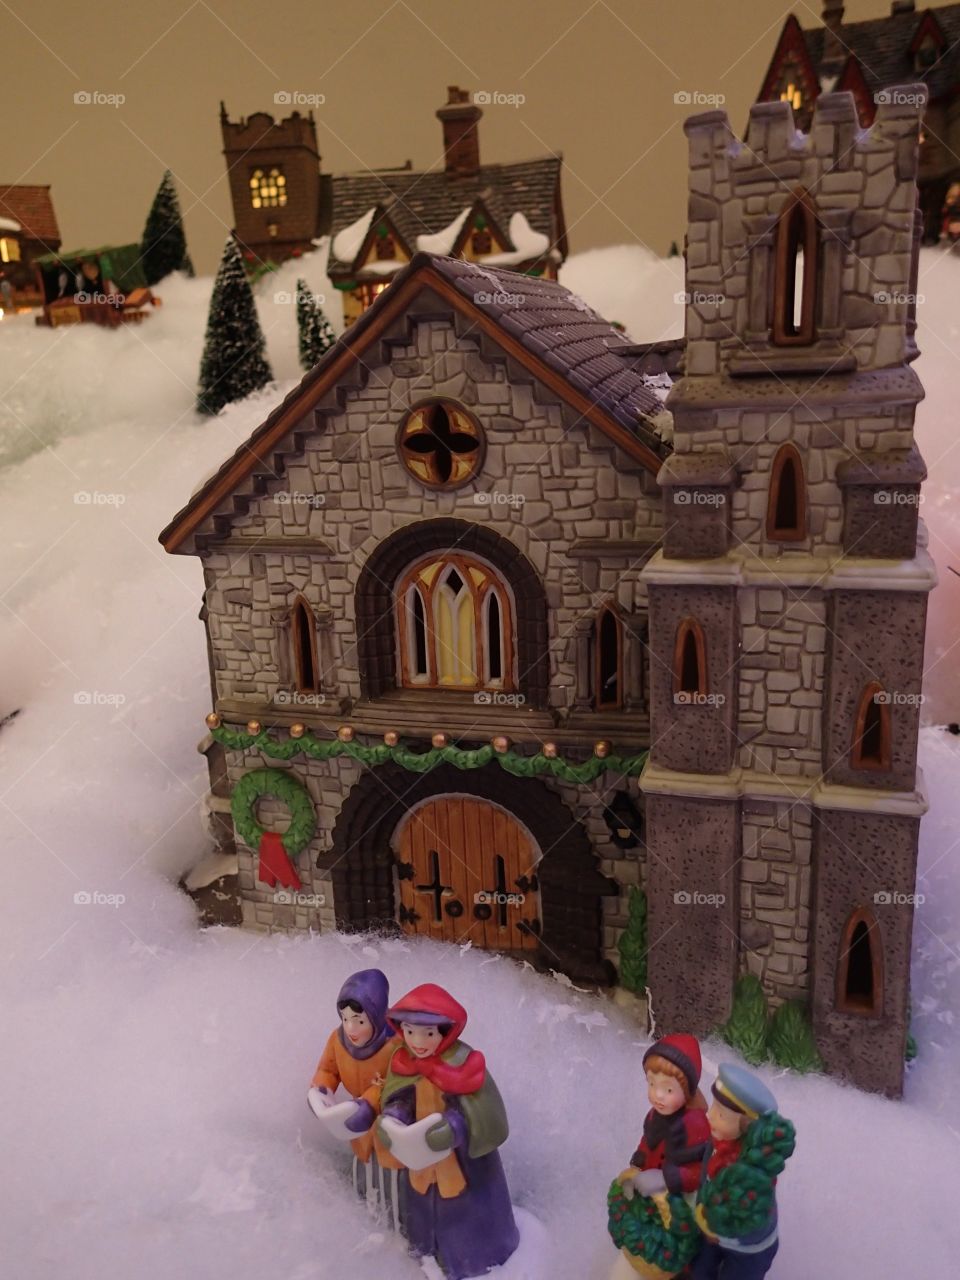 A pleasant scene from a Christmas Village. 